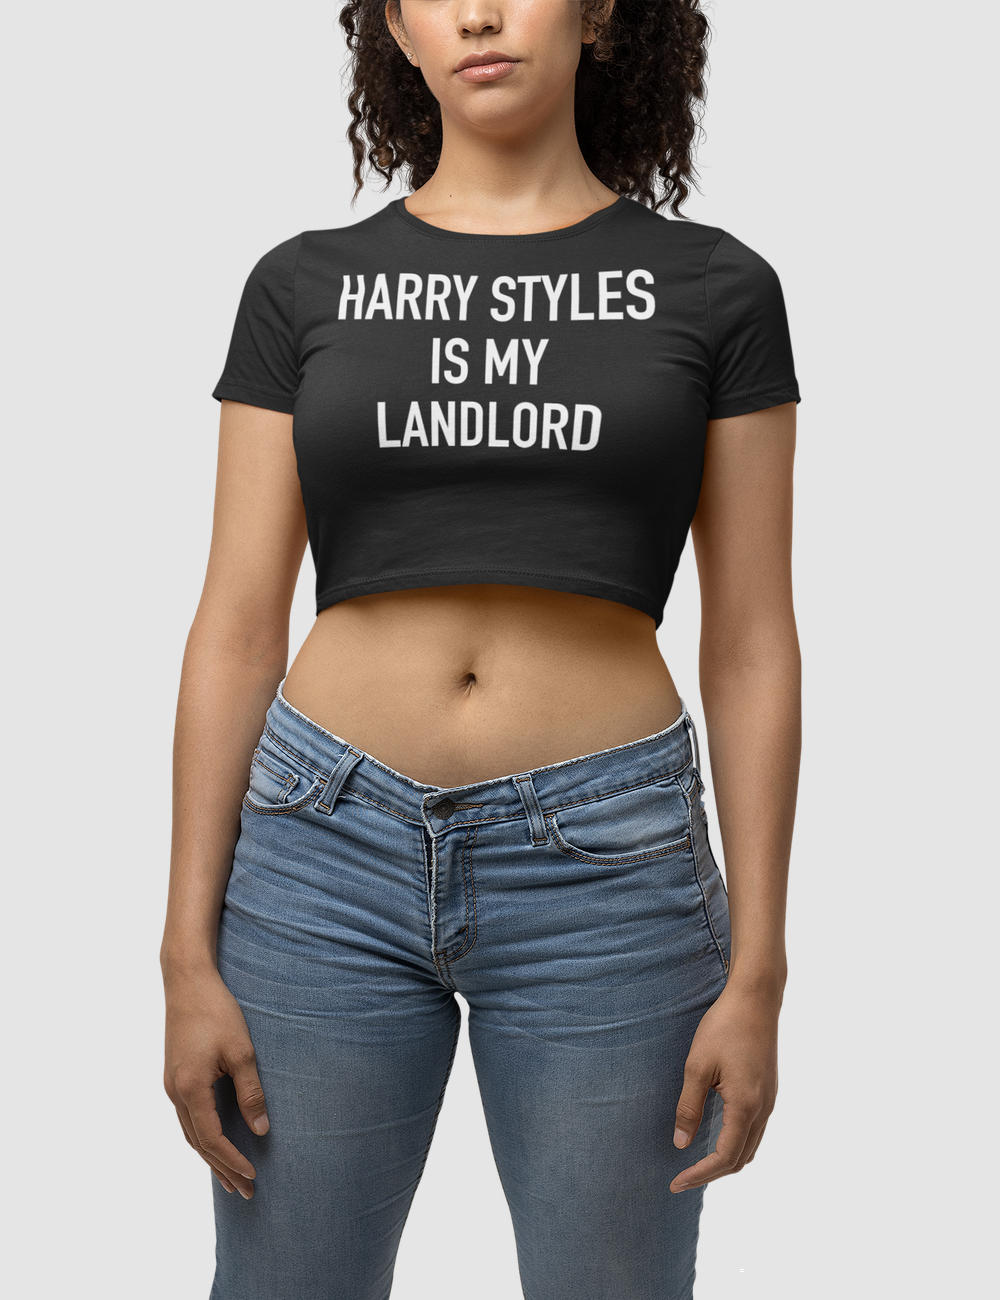 Harry Styles Is My Landlord | Women's Fitted Crop Top T-Shirt OniTakai